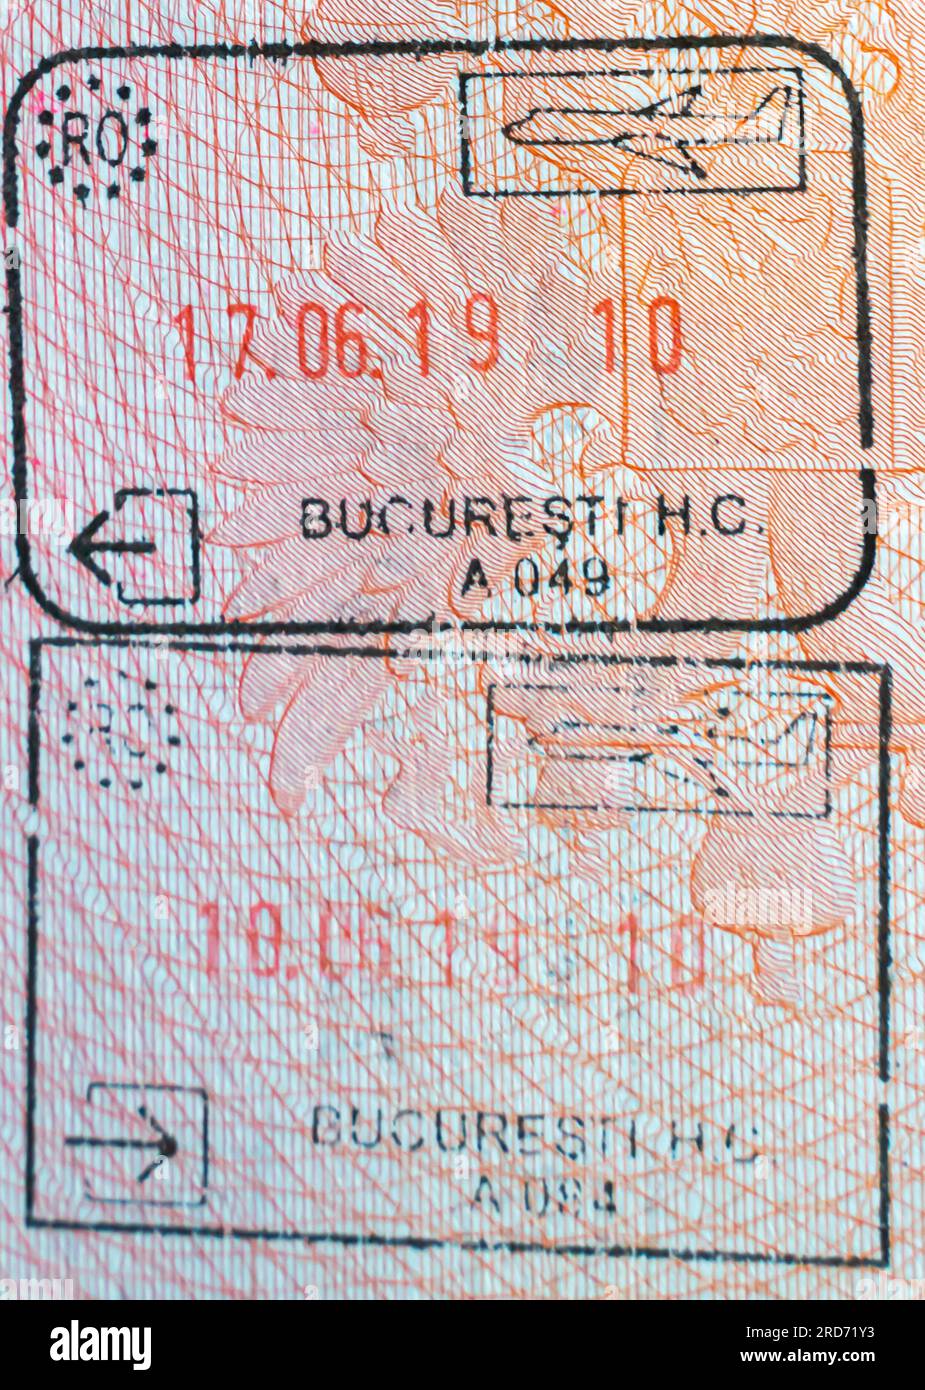 Romanian border crossing stamps with the name of Bucharest border points in an open Russian passport. Romania exit passport stamp. Stock Photo